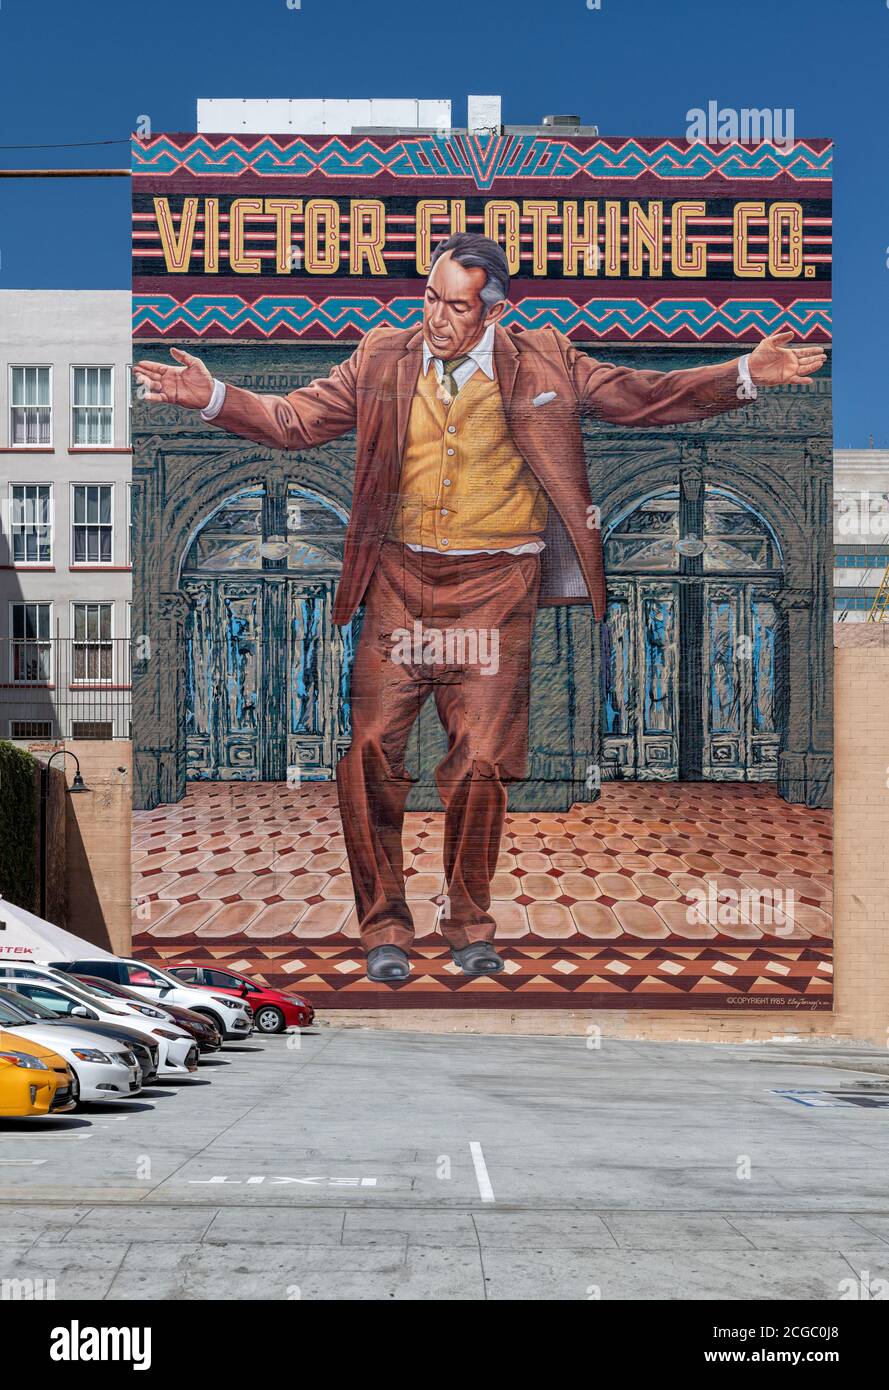 Pope of Broadway 1986 (restored 2017), A summer day shot of a large mural, street art, downtown LA, California, USA. Stock Photo